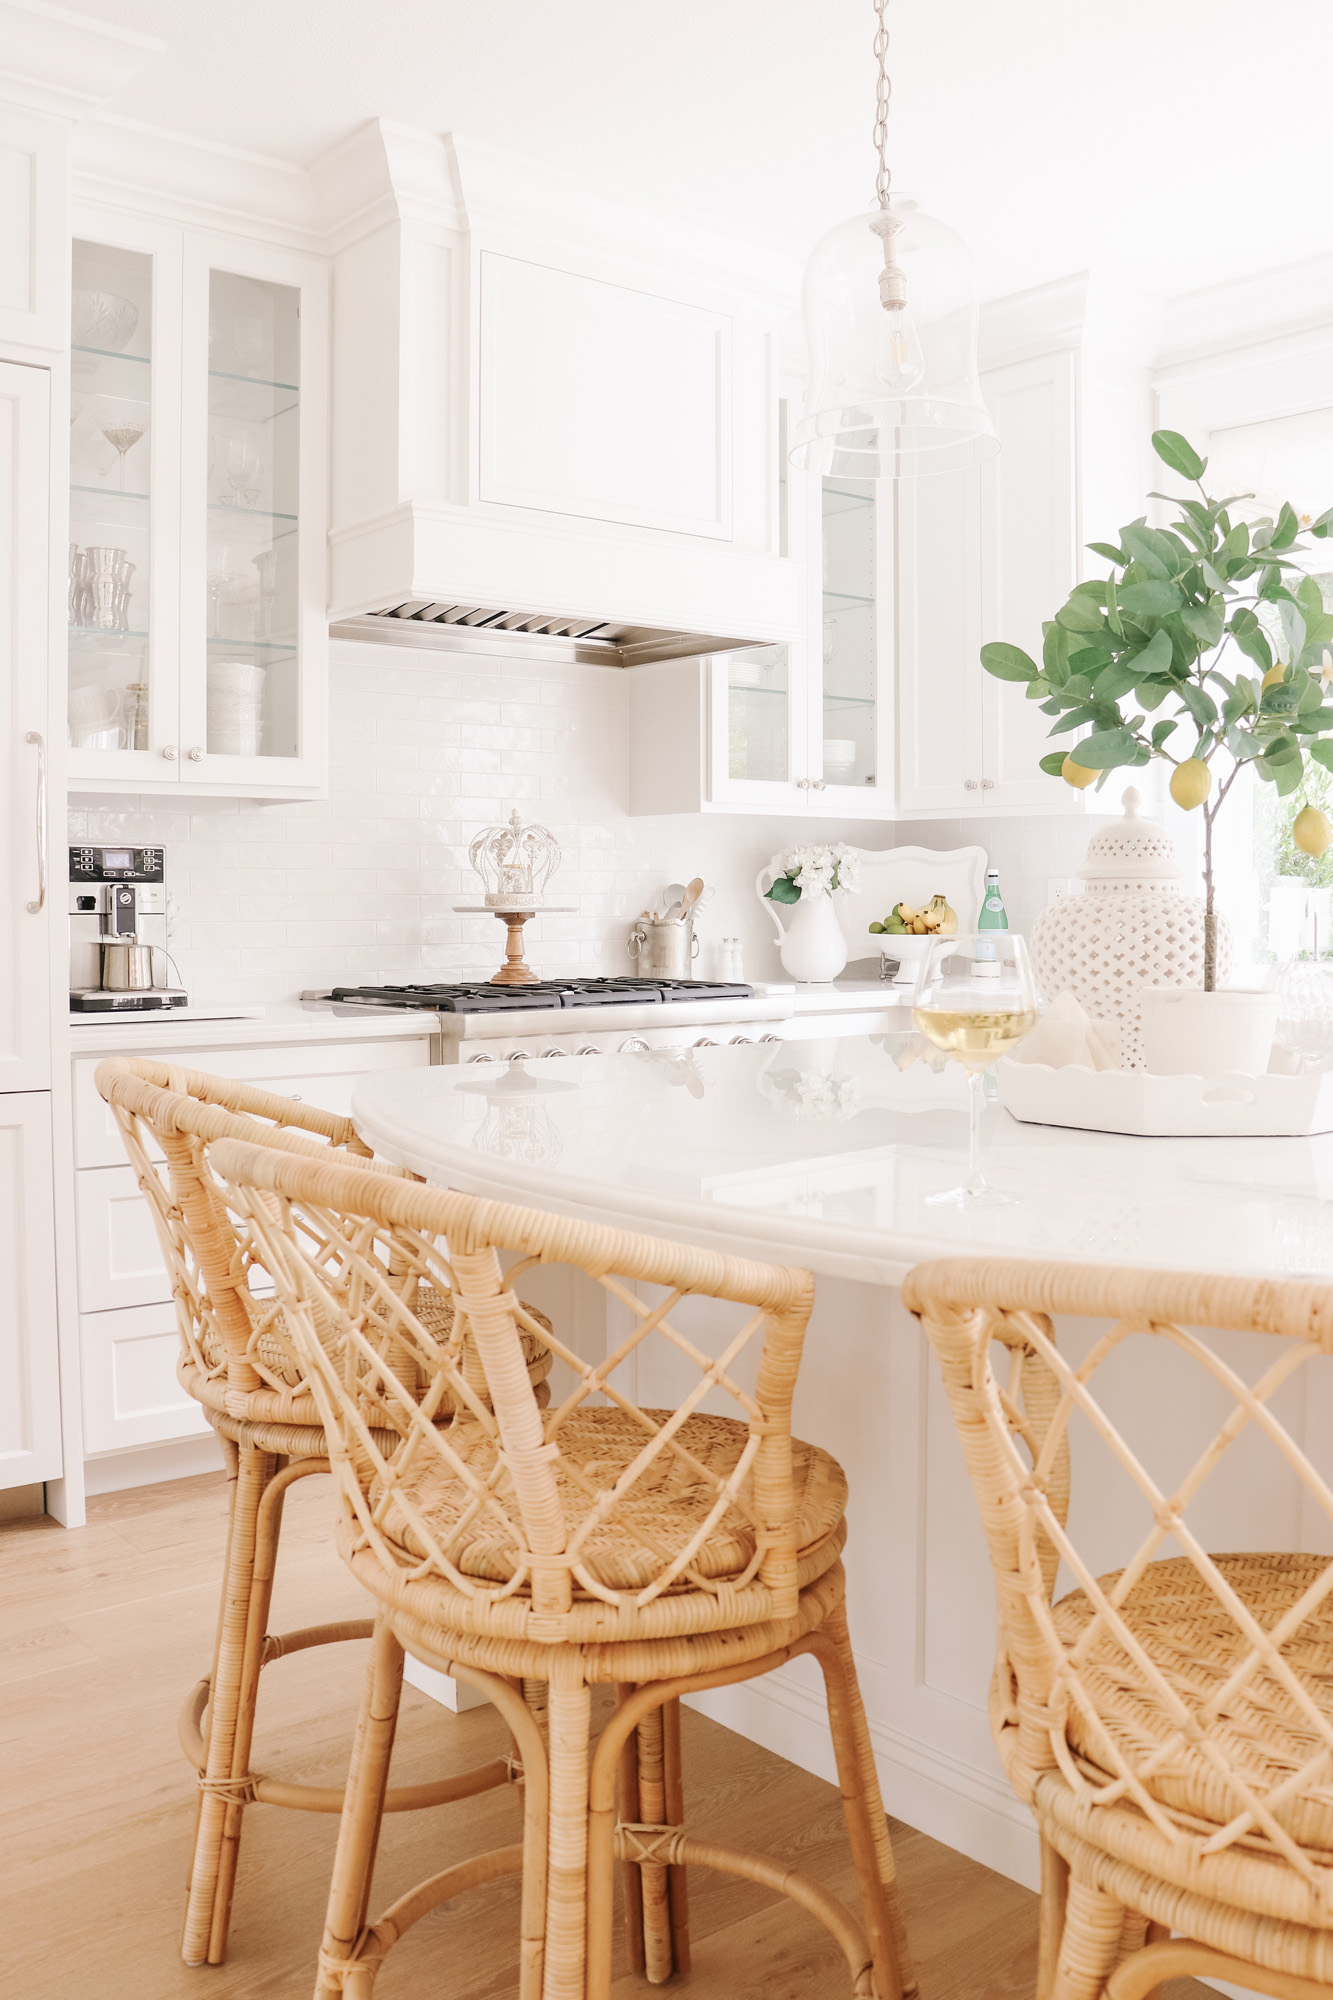 Bringing Texture to the Kitchen with Rattan Stools - Obsessed with my new woven stools! I sourced all of my favorite rattan and woven decor pieces too.  | Kristy Wicks